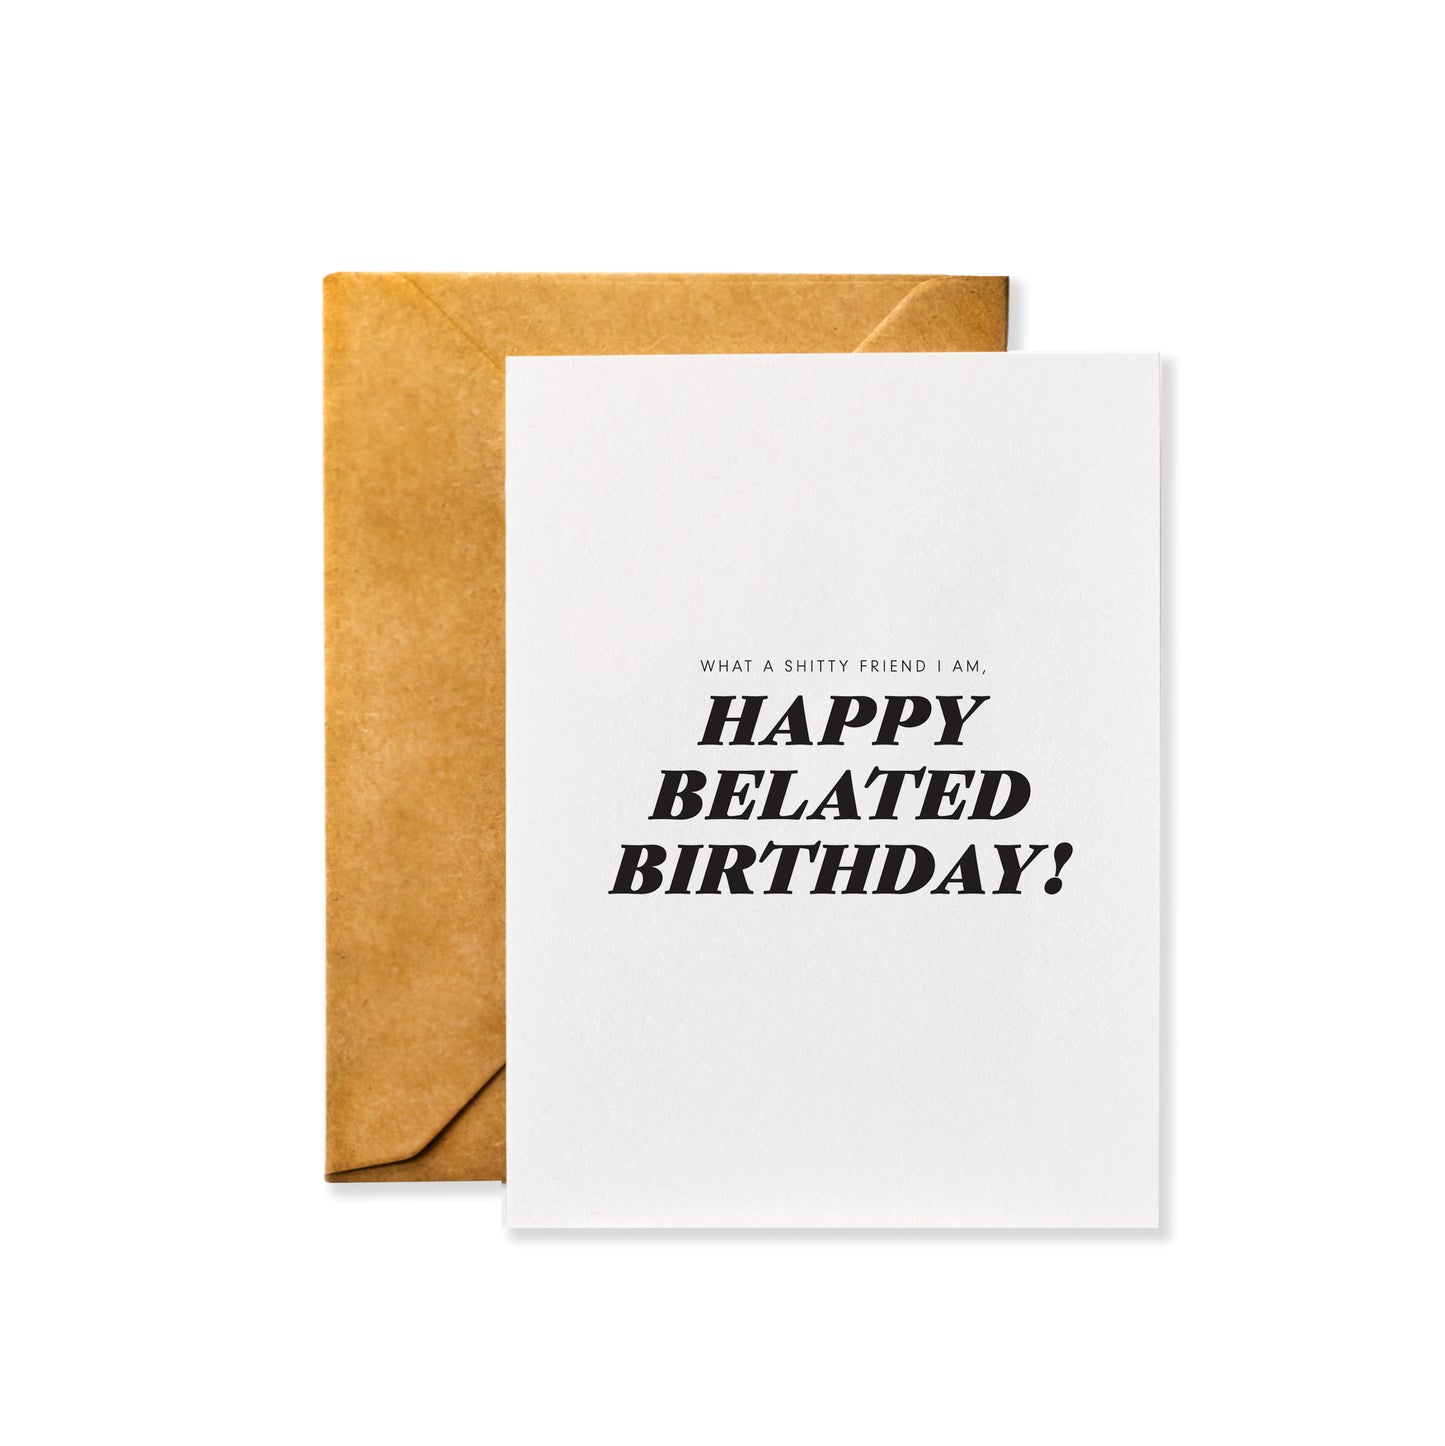 What a Shitty Friend I am. Happy Belated Birthday! - Greeting Card